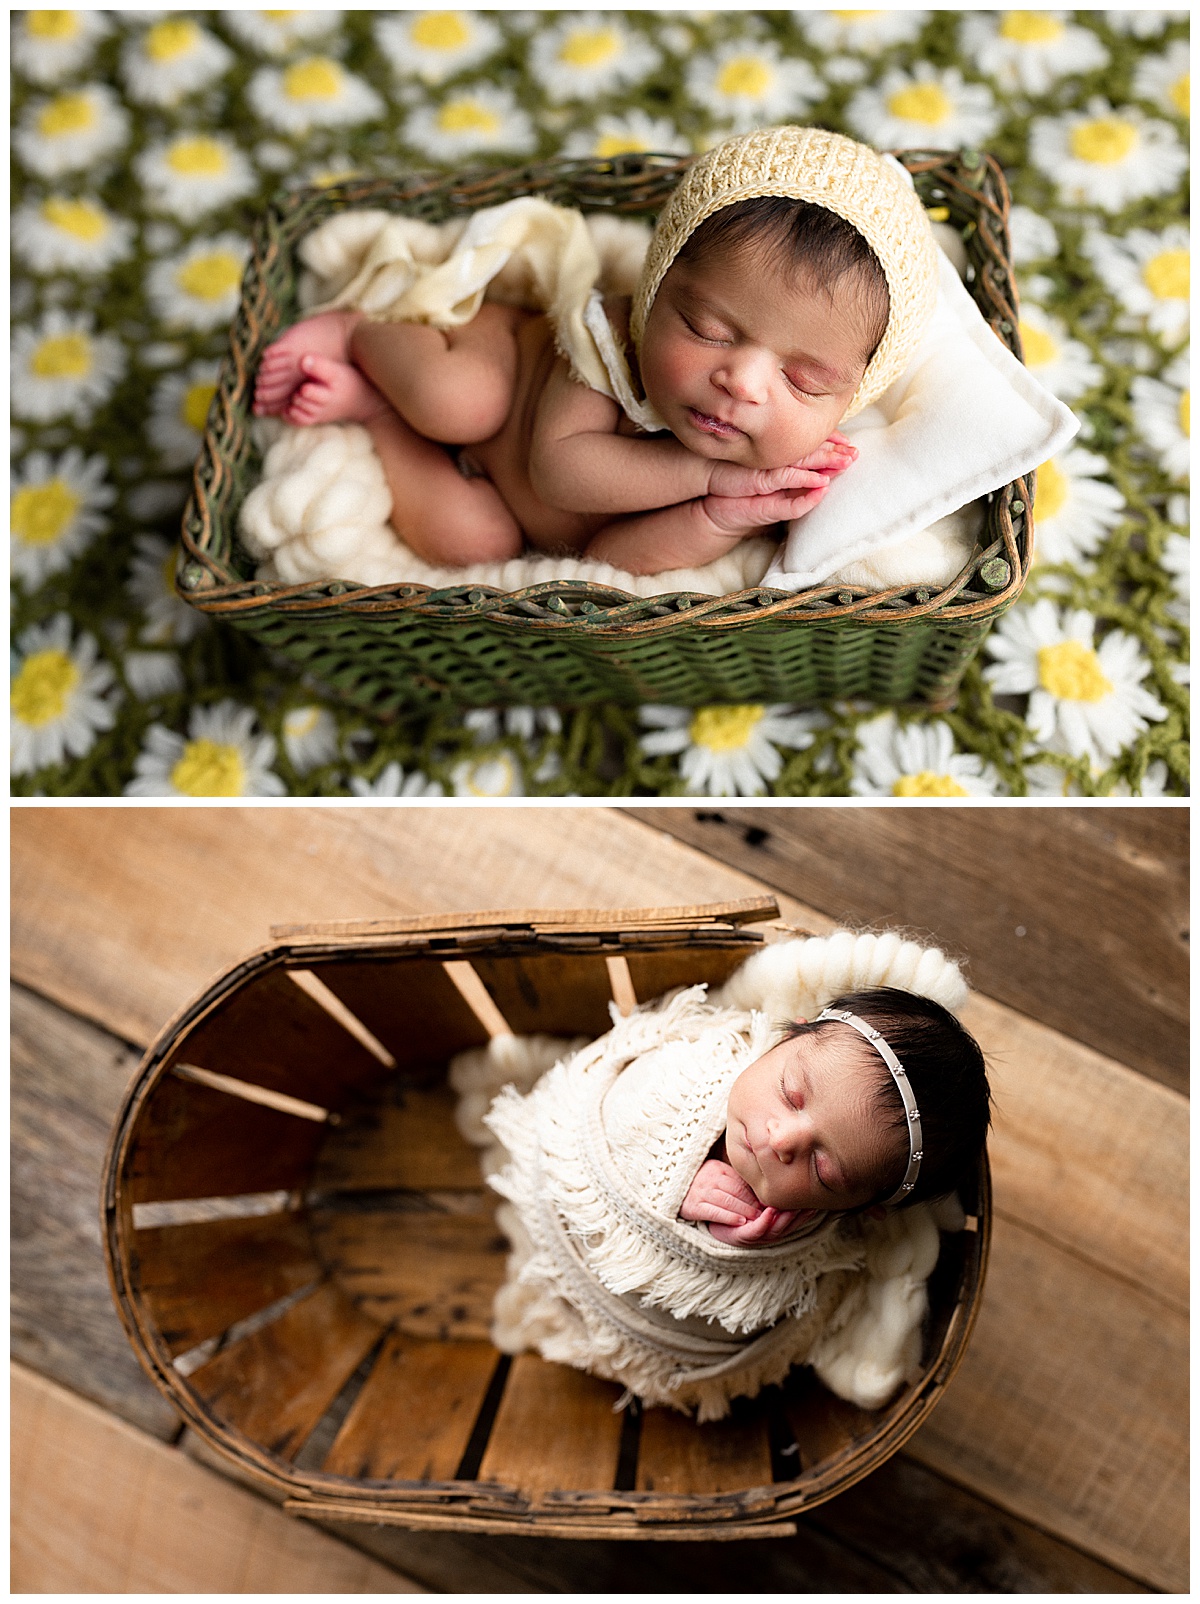 Infant sleeps in baskets on floral blankets for Norma Fayak Photography